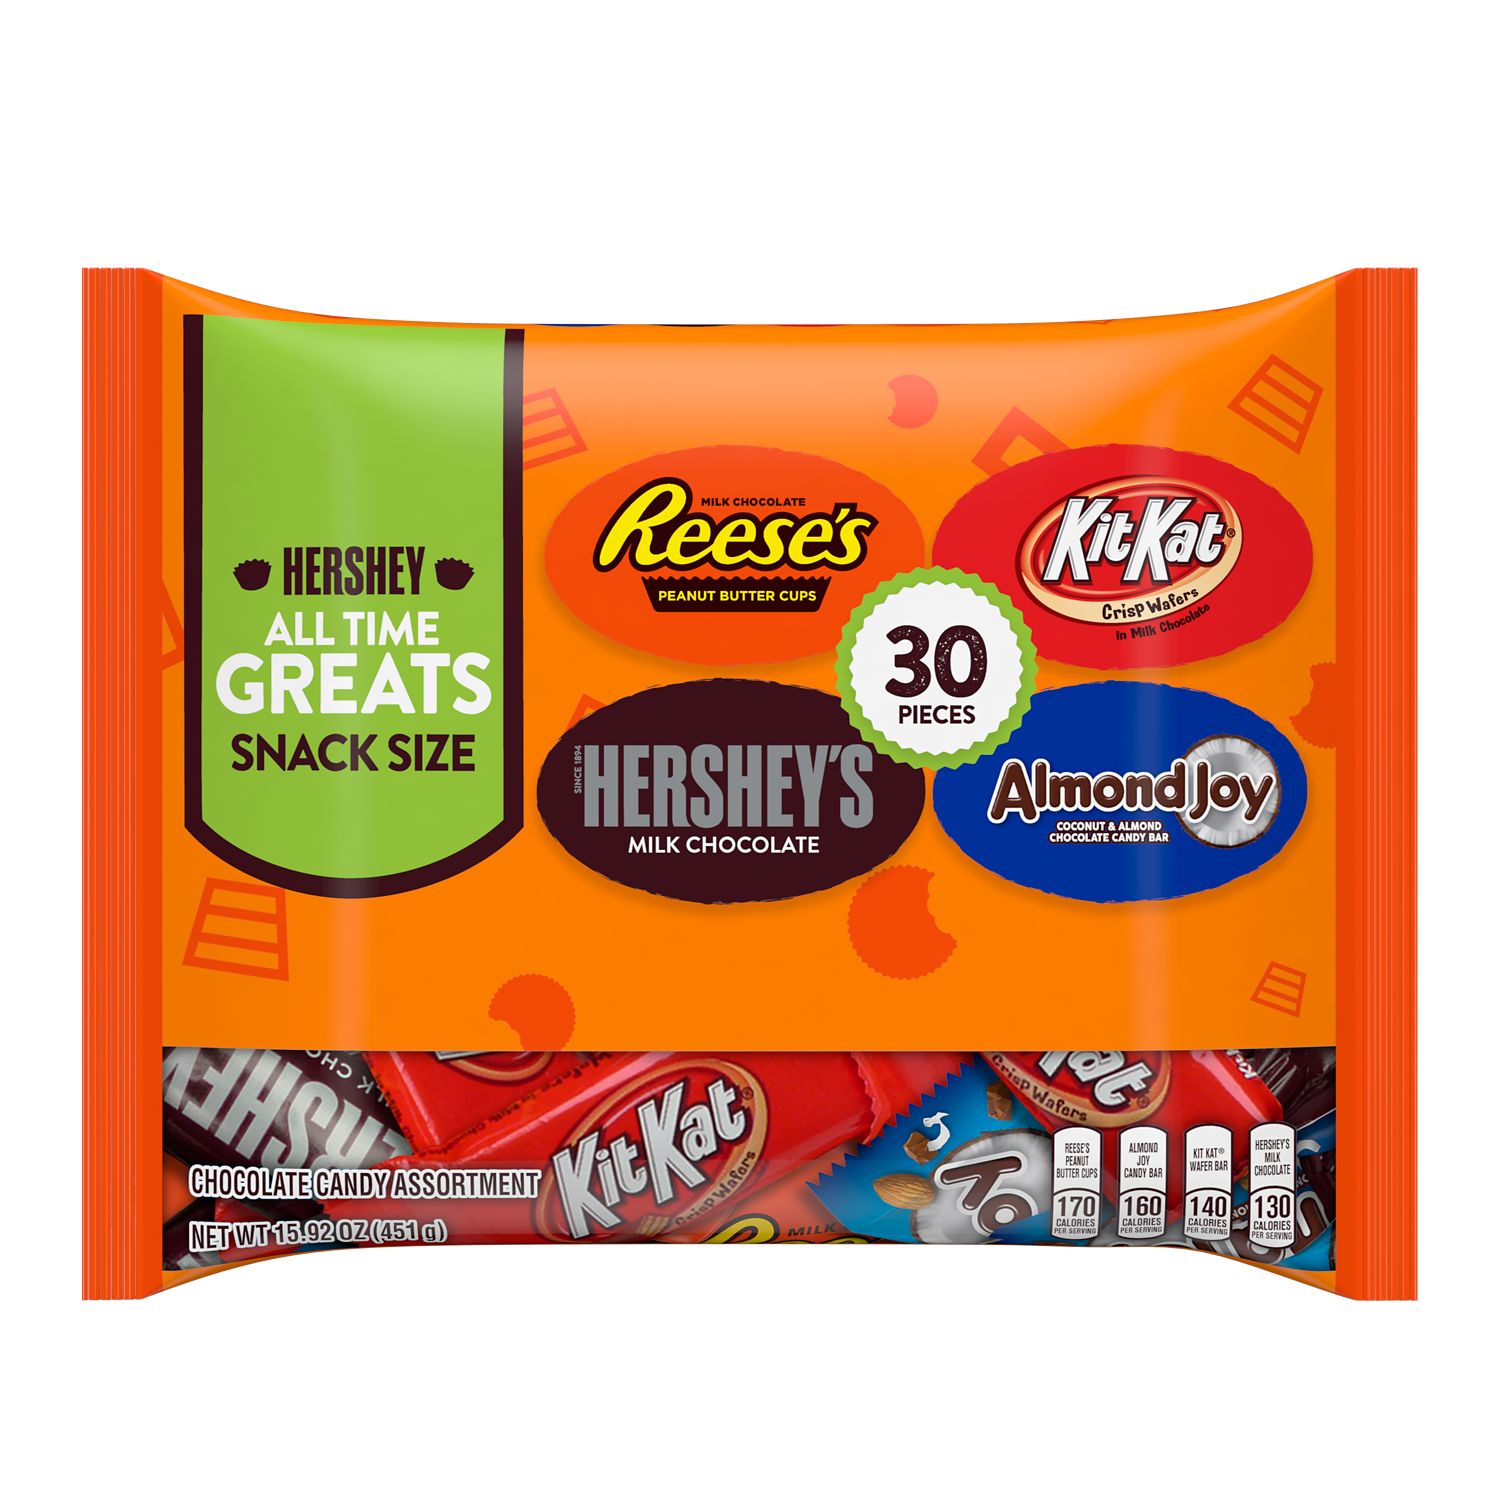 Hershey All Time Greats Chocolate Assortment Snack Size Candy, 15.92 oz, Variety Bag (30 Pieces) - image 1 of 6